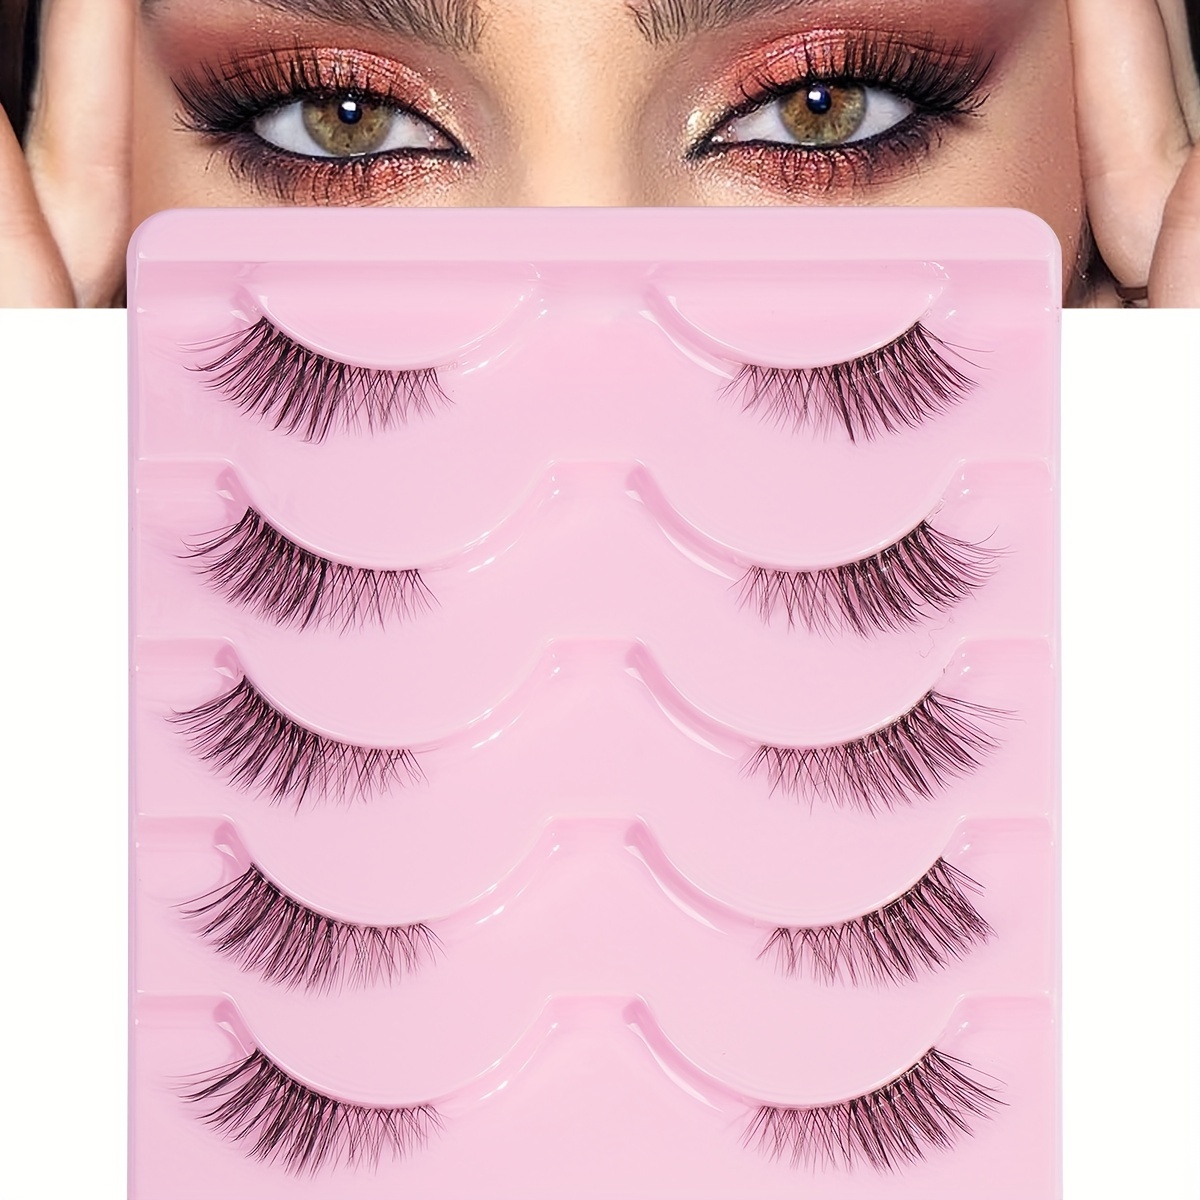 

5 Pairs Half Eye Eyelashes With Transparent Stem Natural And Long Cross-fluffy, Eye End Elongated Style Reusable With Self-adhesive 3d Faux Mink Hair Eyelashes